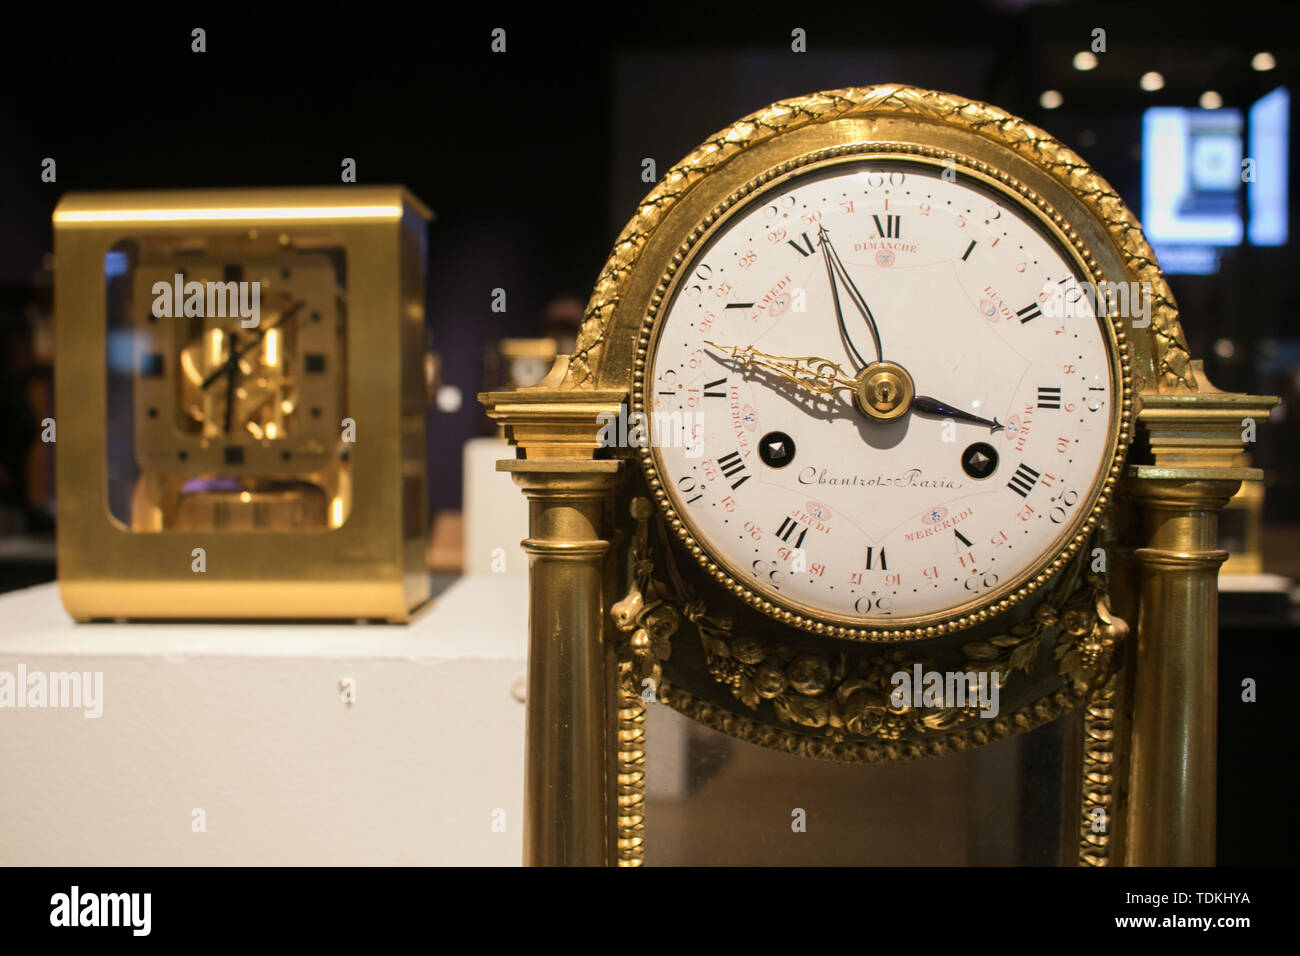 Bonhams London, 17th June 2019. Bonhams photocall of the World's Most valuable clocks from the Clive Collection to appear at auction at Bonhams New Bond Street Credit: amer ghazzal/Alamy Live News Stock Photo